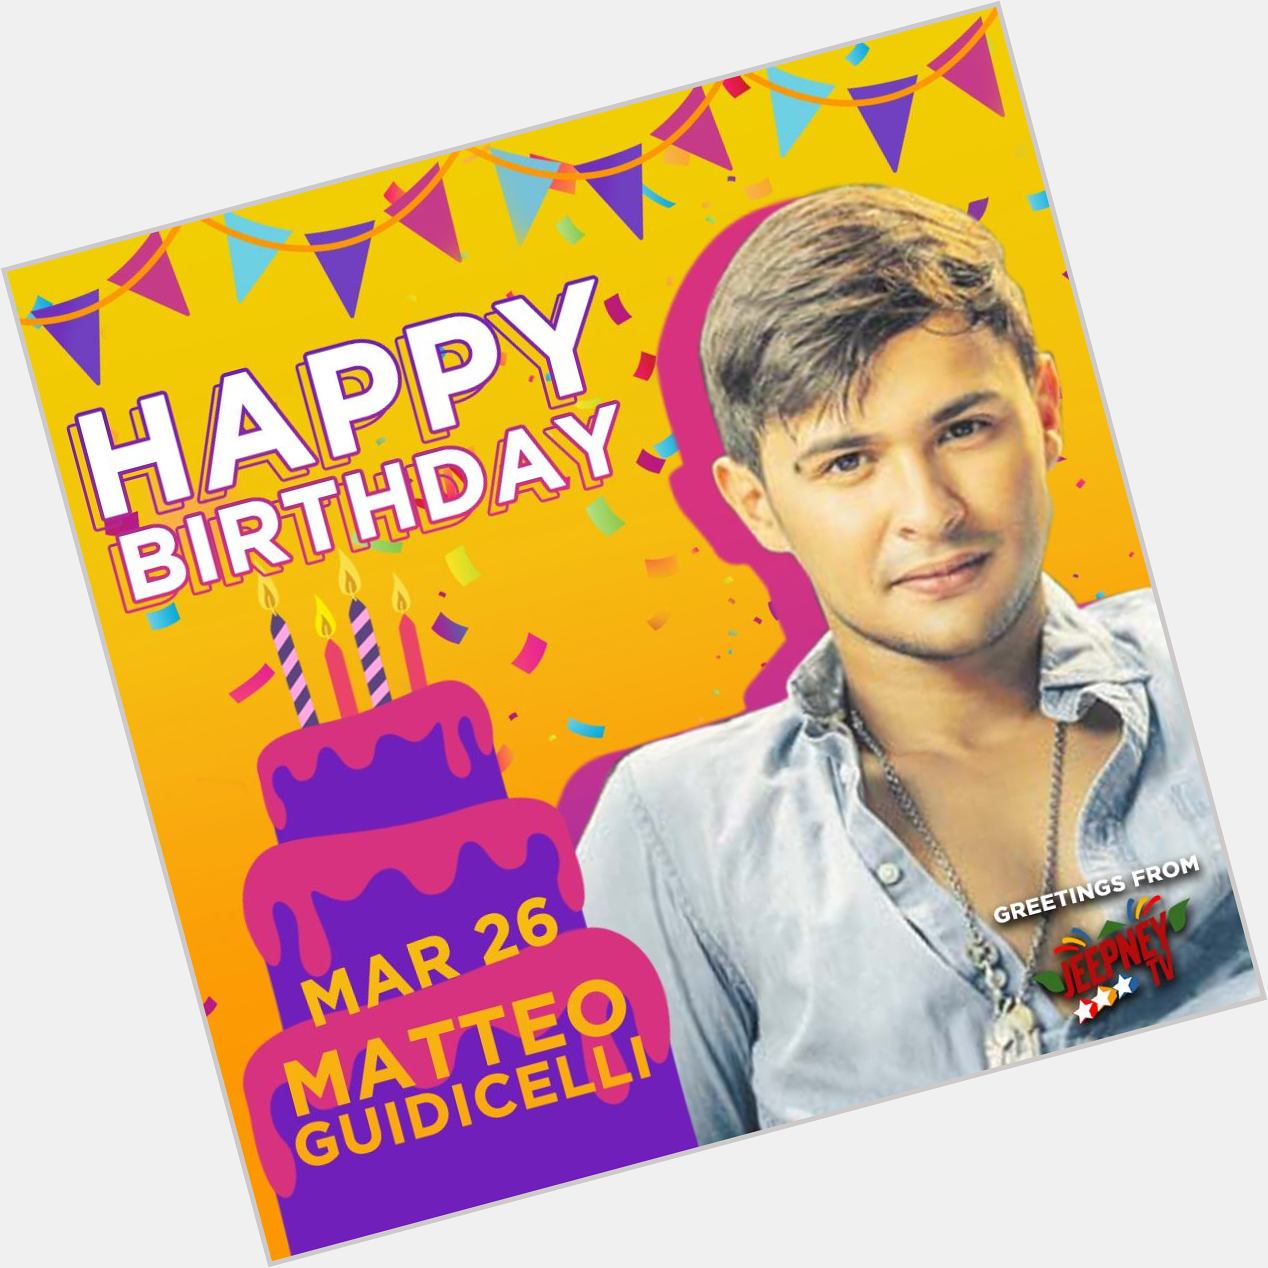 Happy birthday Matteo Guidicelli!  Greetings from Jeepney TV 